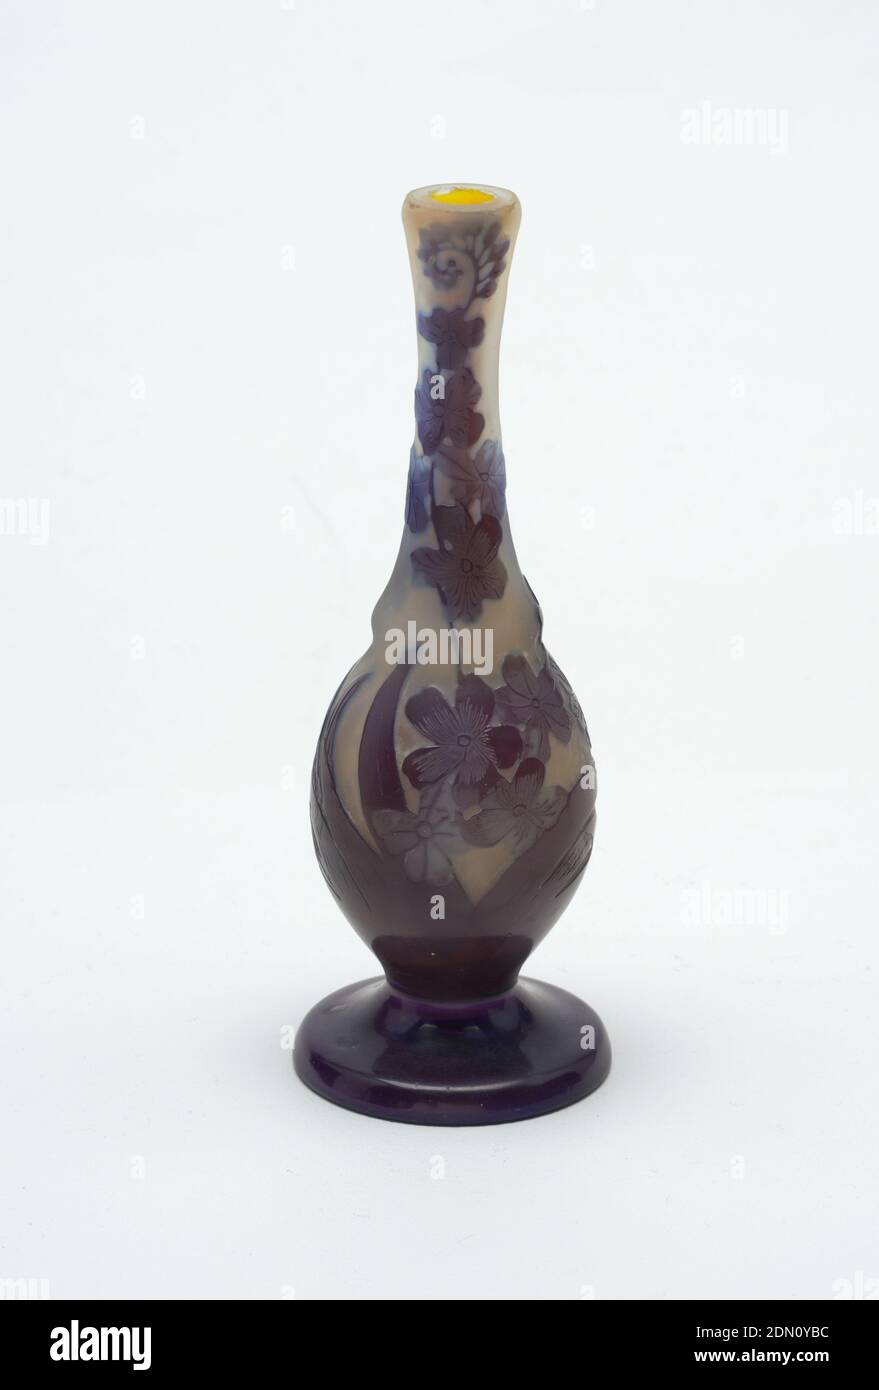 Vase, Gallé, Emile Gallé, French, 1846 - 1904, Glass, Tall ovoid footed vase  with long neck; opaque black base and flowers on opaque cream ground.,  France, late 19th–early 20th century, glasswares, Decorative